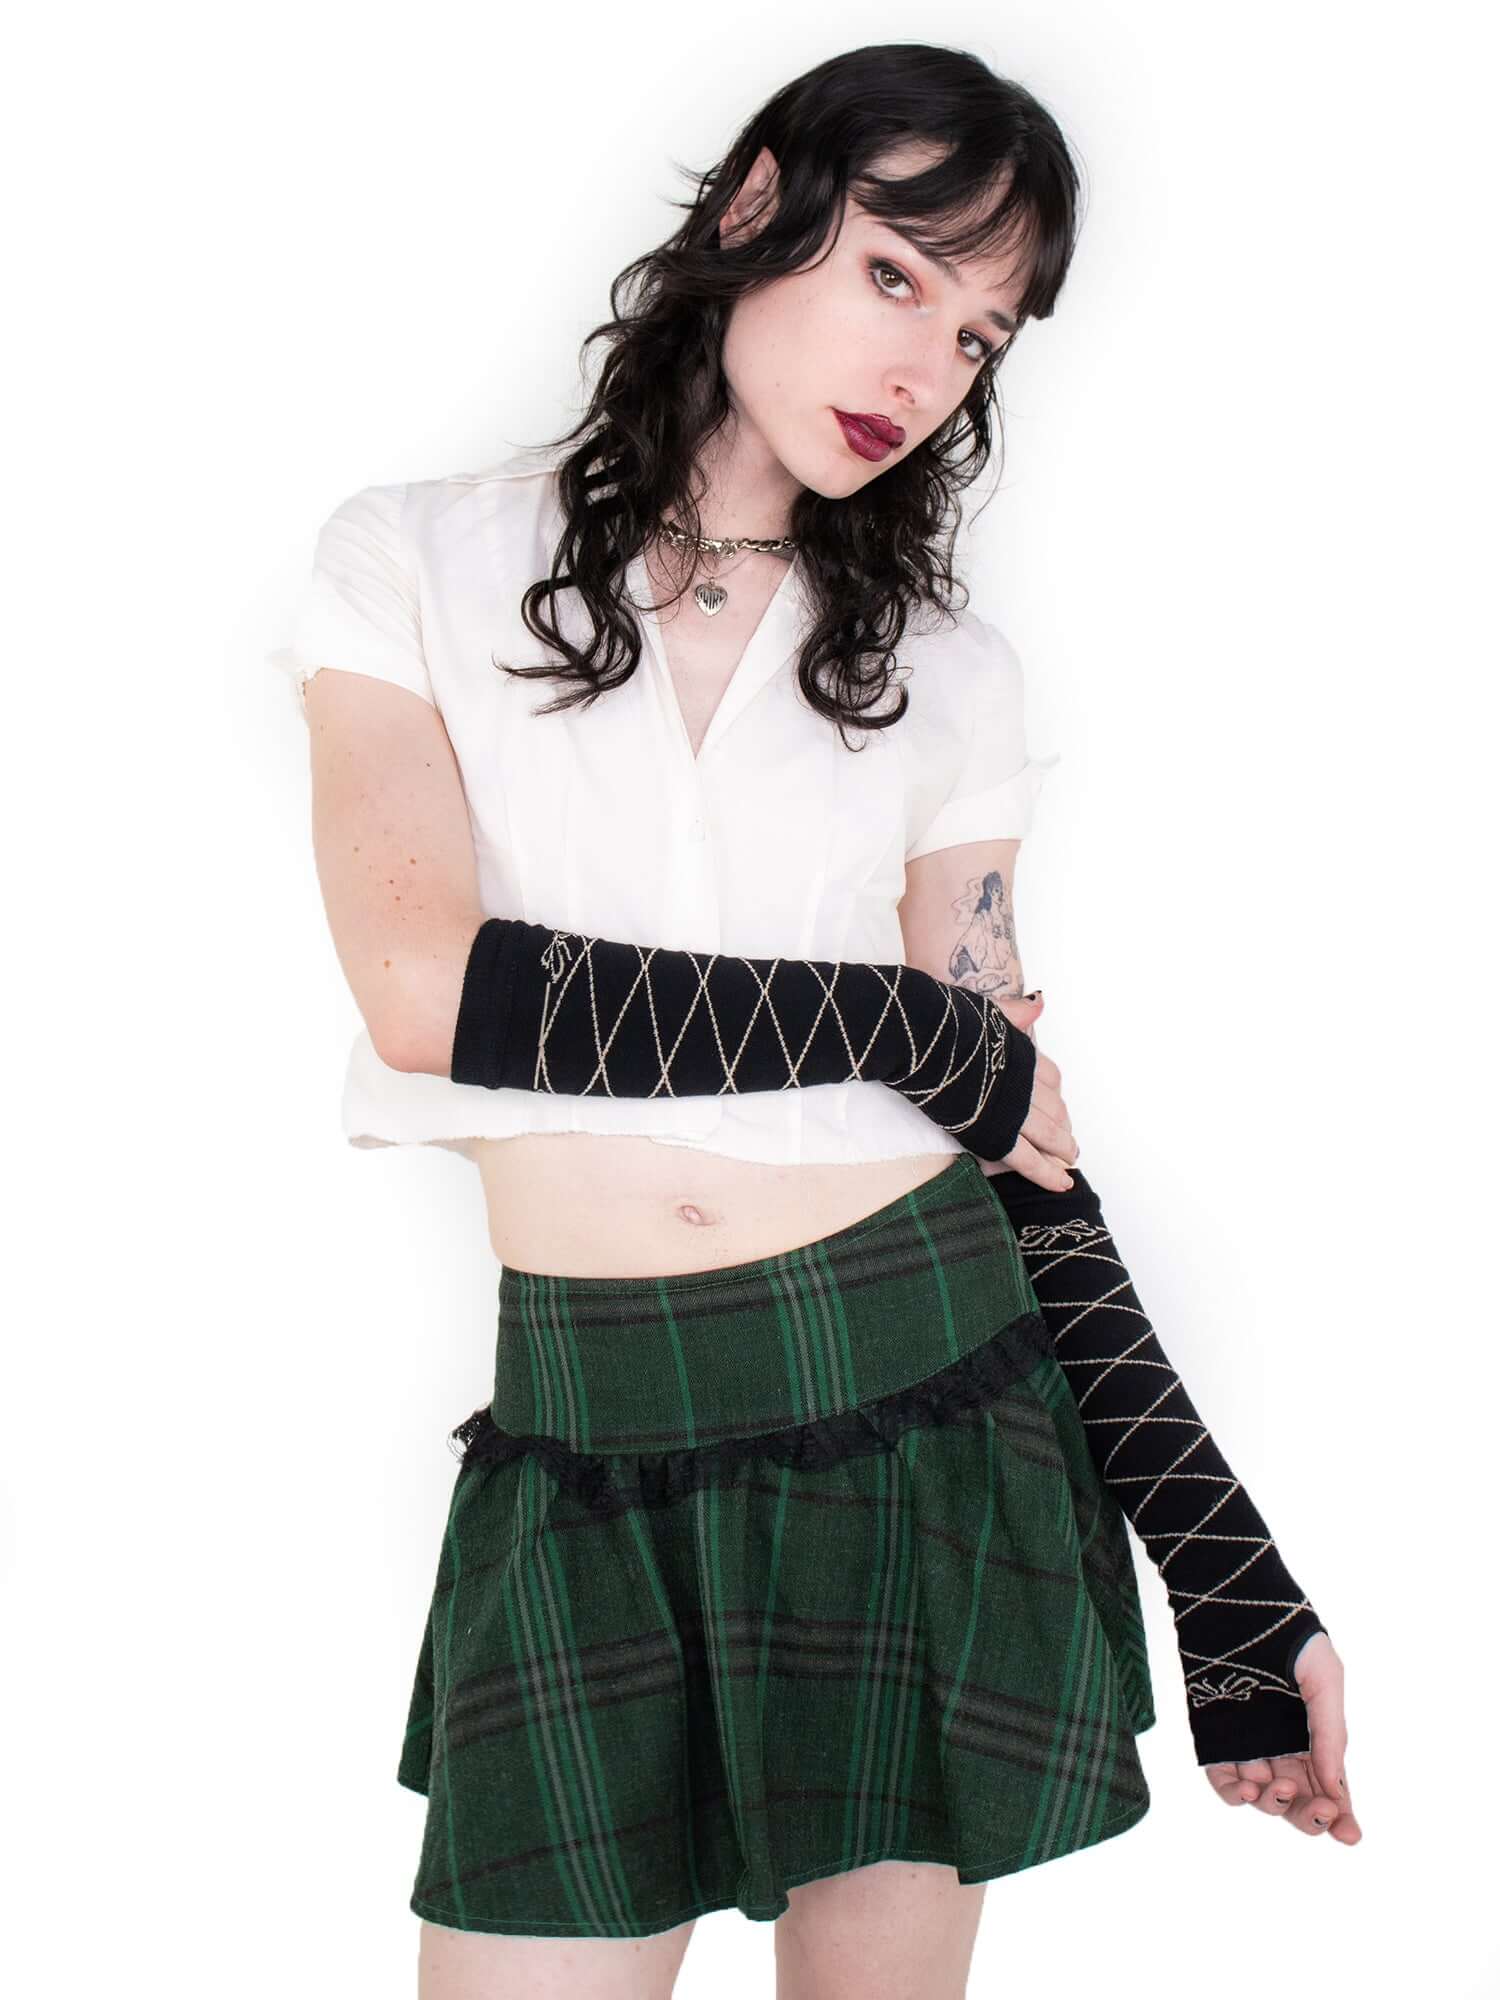 Further away photo of model wearing gloves, styled with white blouse and green plaid skirt